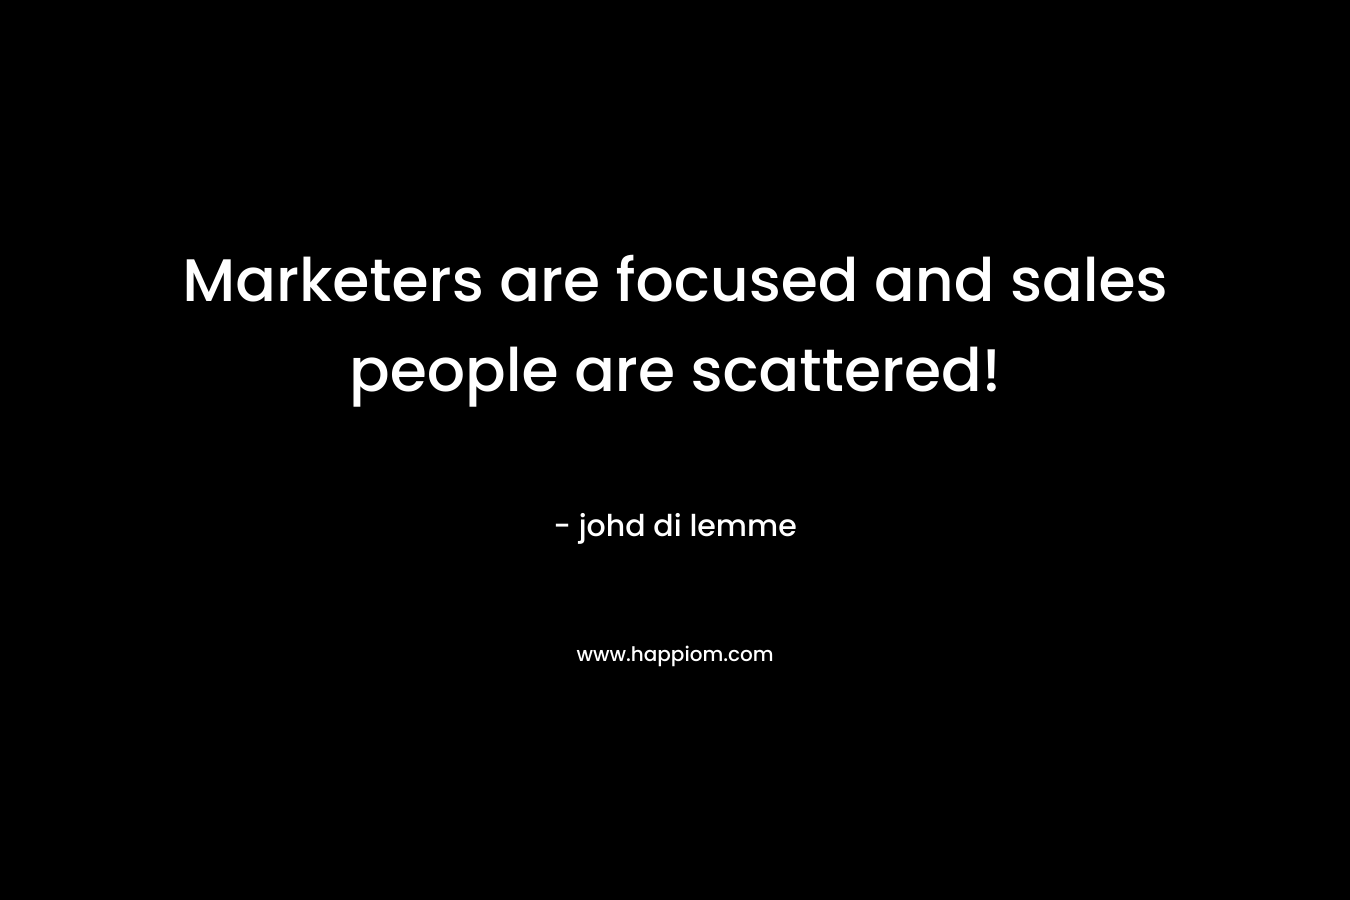 Marketers are focused and sales people are scattered! – johd di lemme